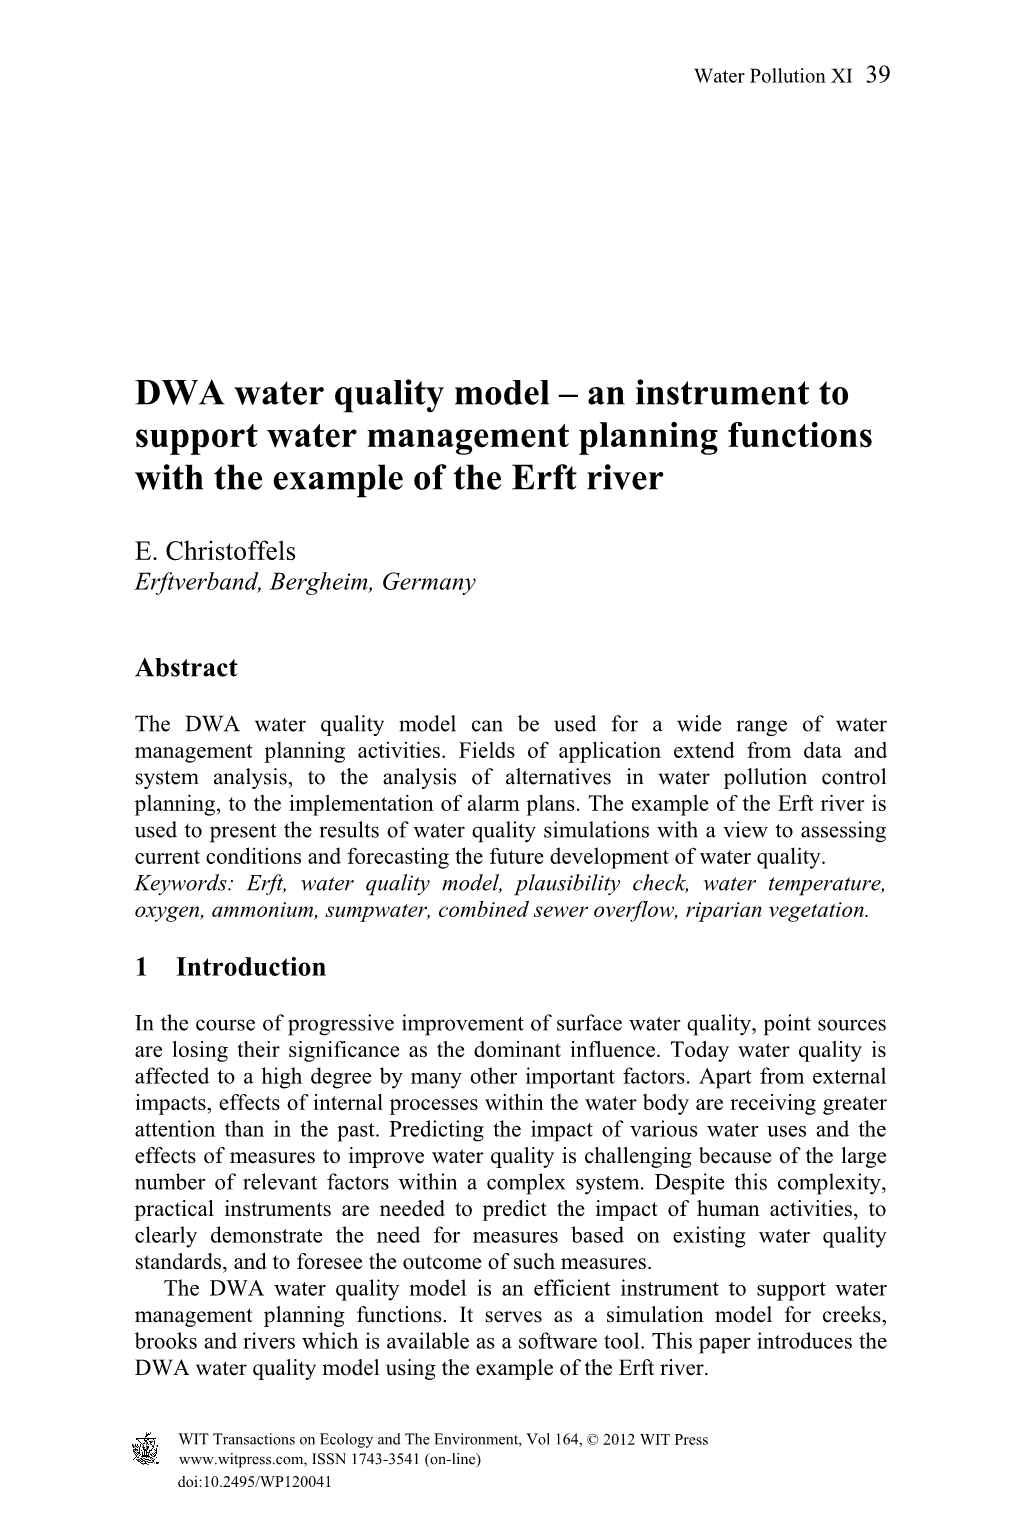 DWA Water Quality Model – an Instrument to Support Water Management Planning Functions with the Example of the Erft River